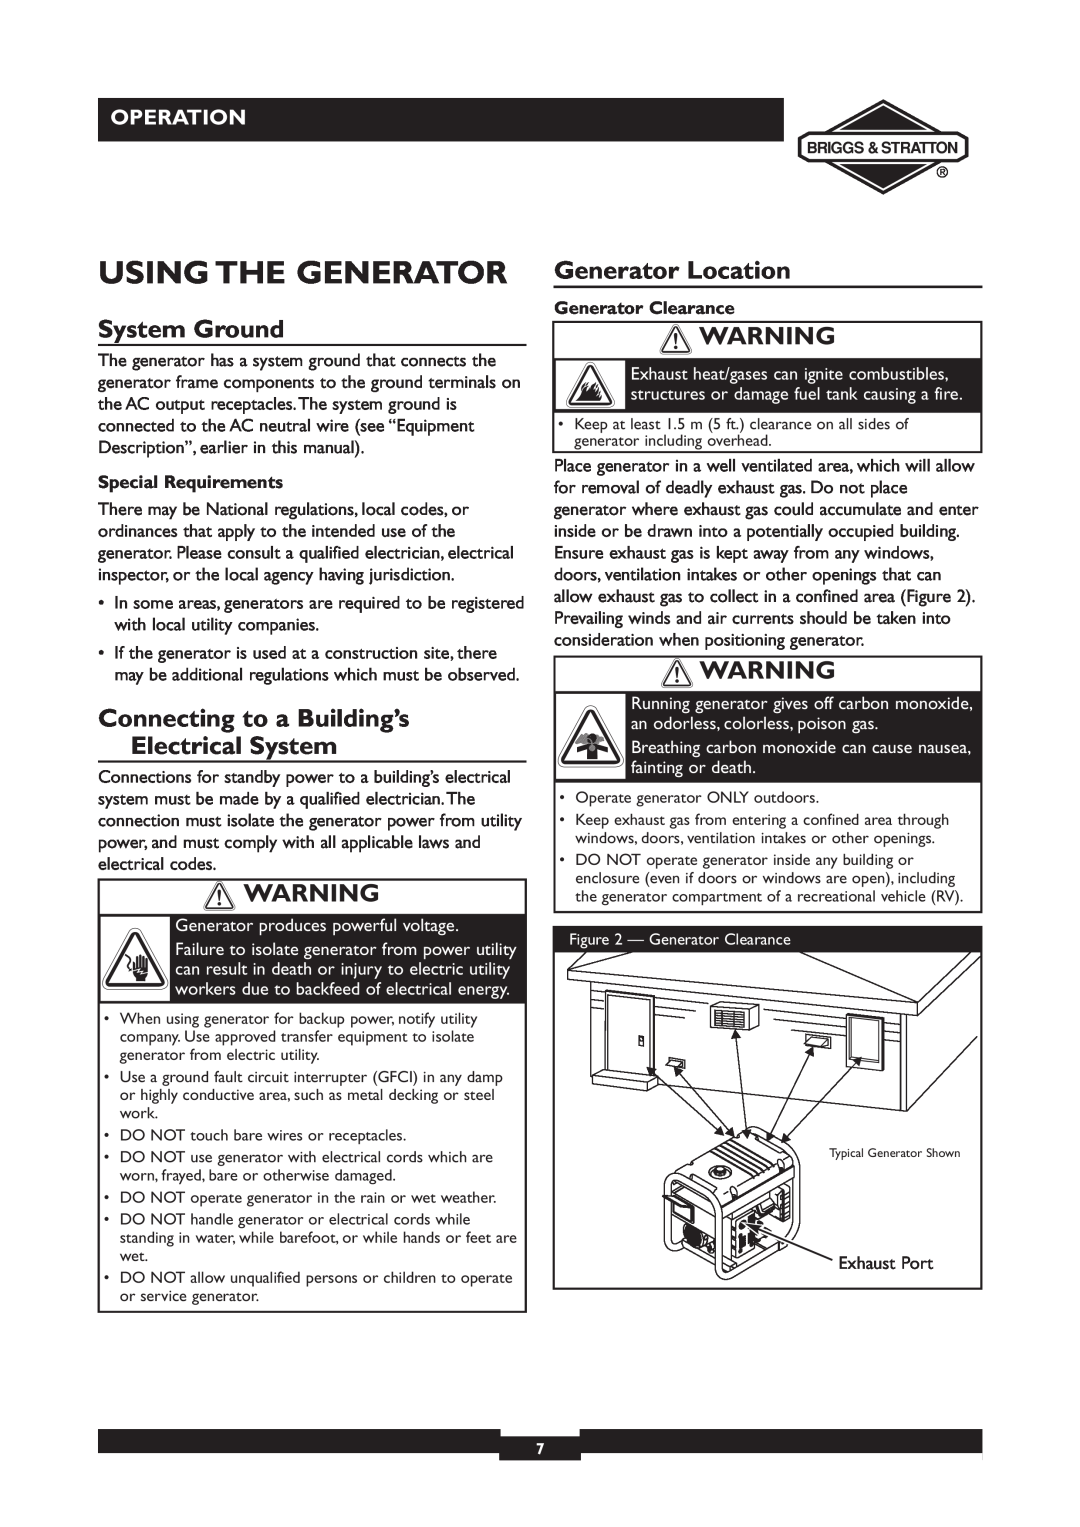 Briggs & Stratton 30231 manual Using The Generator, System Ground, Connecting to a Building’s Electrical System, Operation 